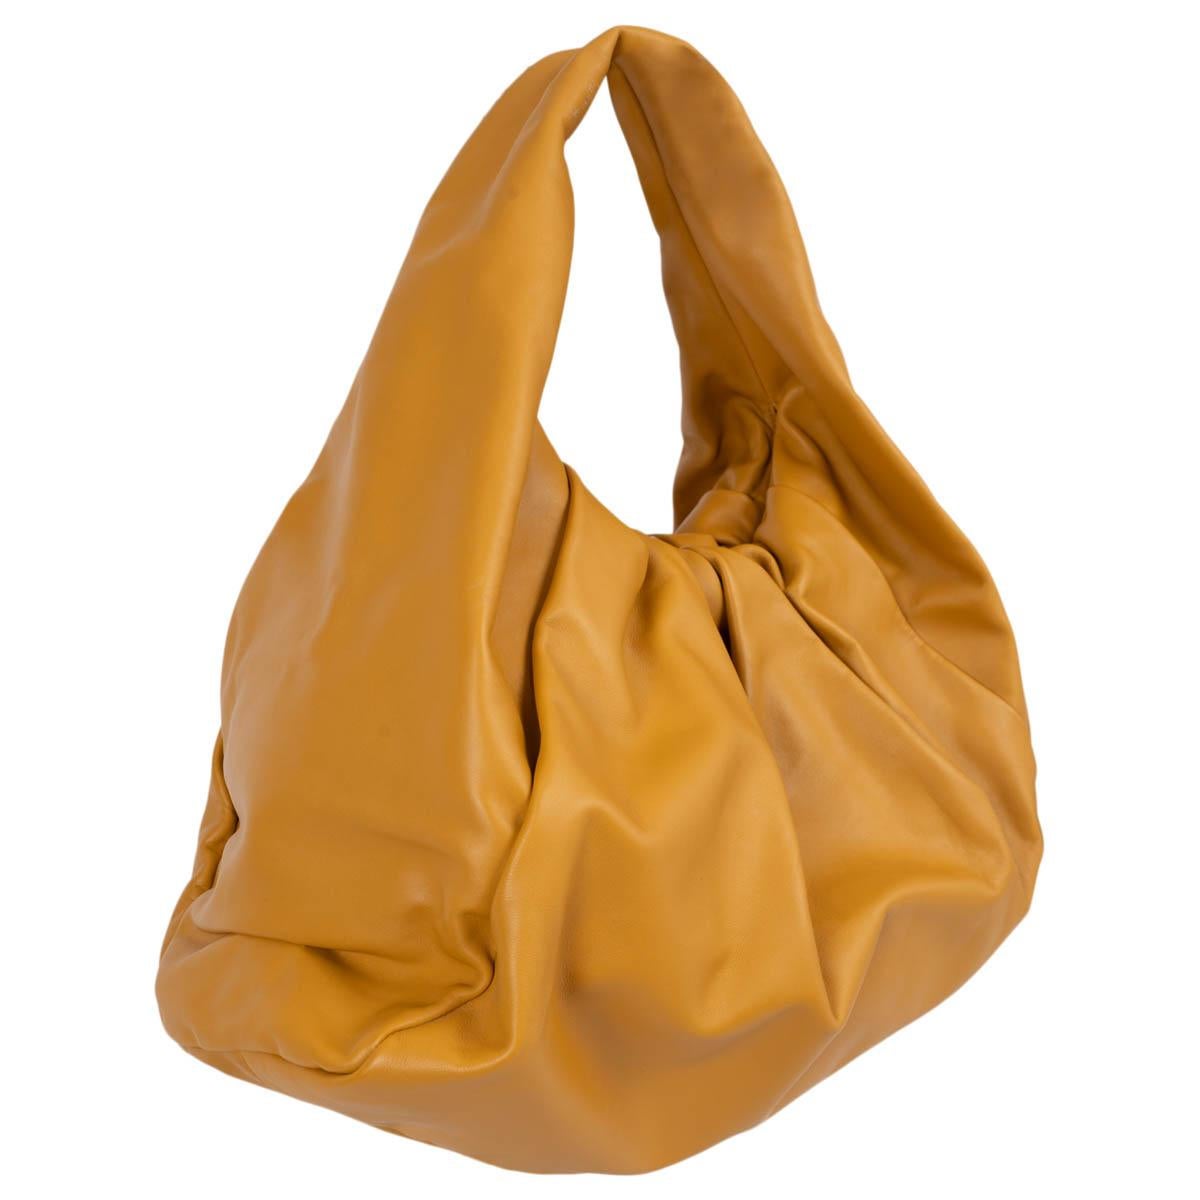 100% authentic Bottega Veneta Pouch Maxi hobo shoulder bag in butterscotch smooth lambskin. Gathered frame closure. Has been carried once and is in virtually new condition. Come with a maxi dust bag. 

Measurements
Height	37cm (14.4in)
Width	53cm